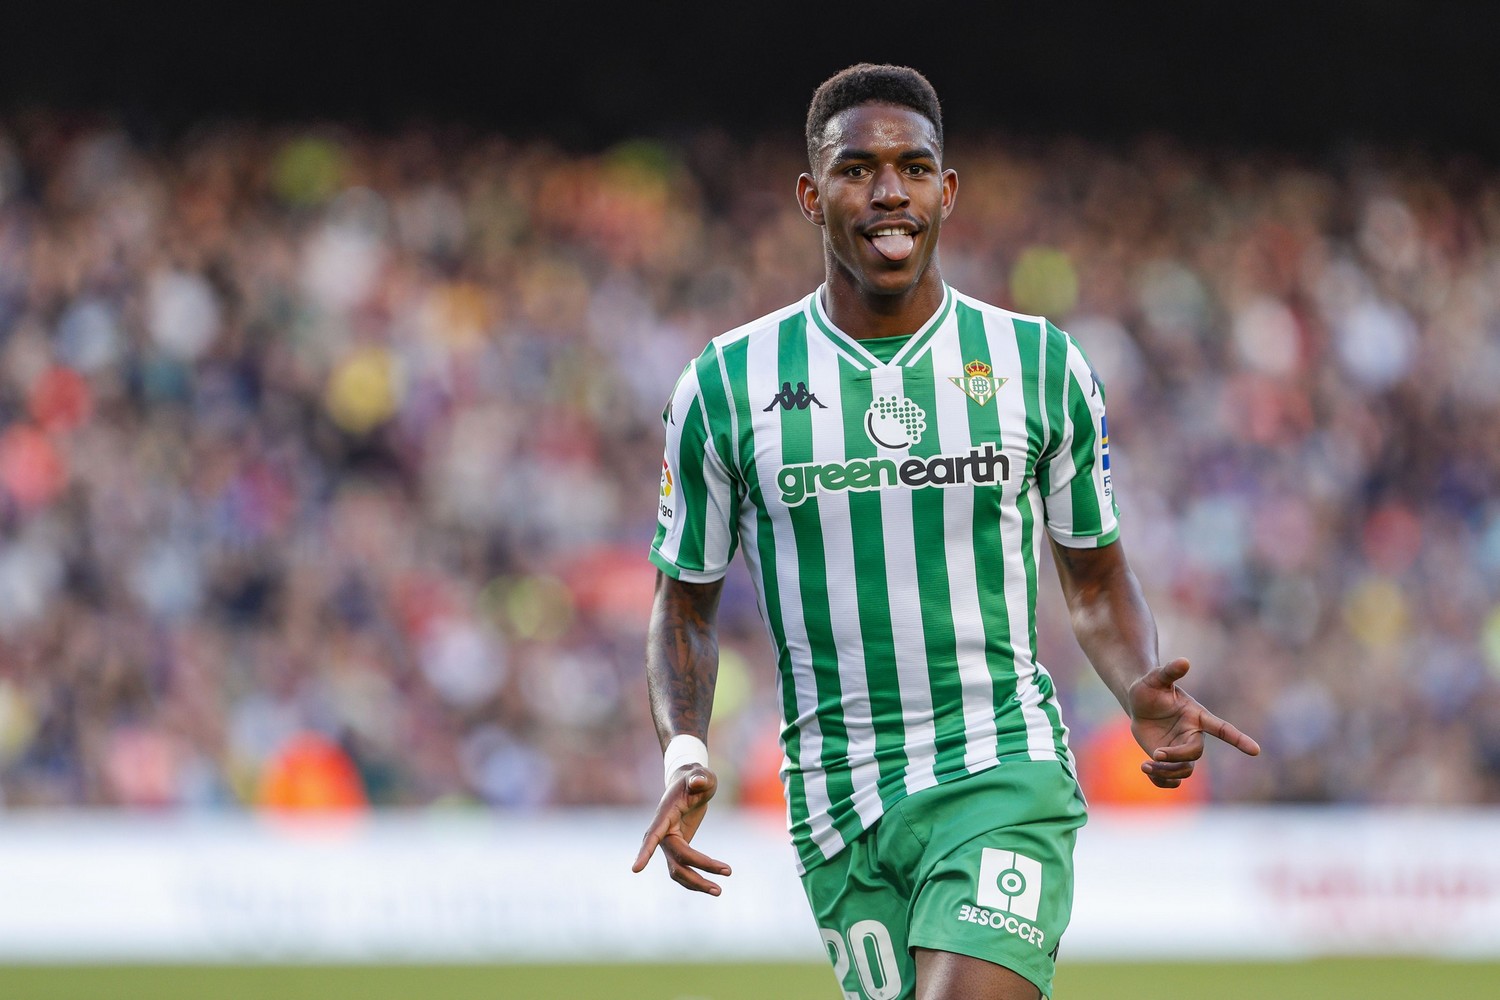 Real Betis Balompie defender Junior Firpo (20) celebrates scoring the goal during the match FC Barcelona against Real Betis Balompie, for the round 12 of the Liga Santander, played at Camp Nou  on 11th November 2018 in Barcelona, Spain. (Photo by Mikel Trigueros/Urbanandsport/NurPhoto via Getty Images)